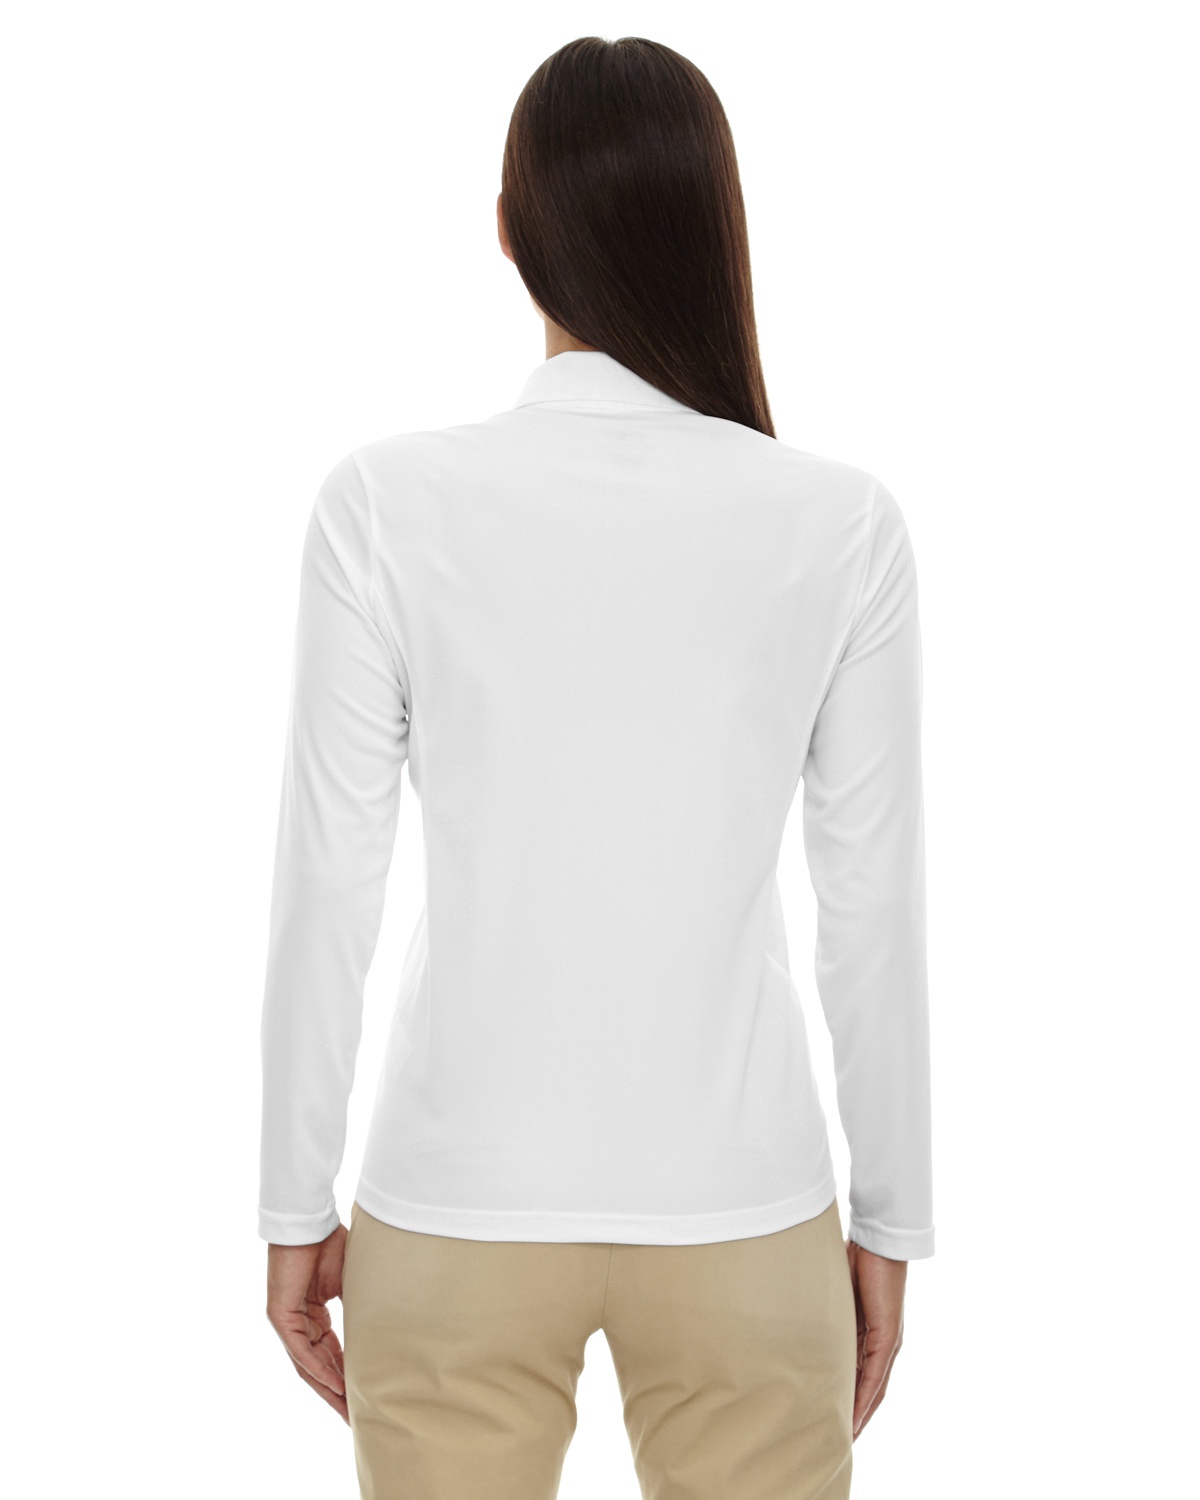 'Ash City - Extreme 75111 Ladies' Eperformance Snag Protection Long-Sleeve Polo'